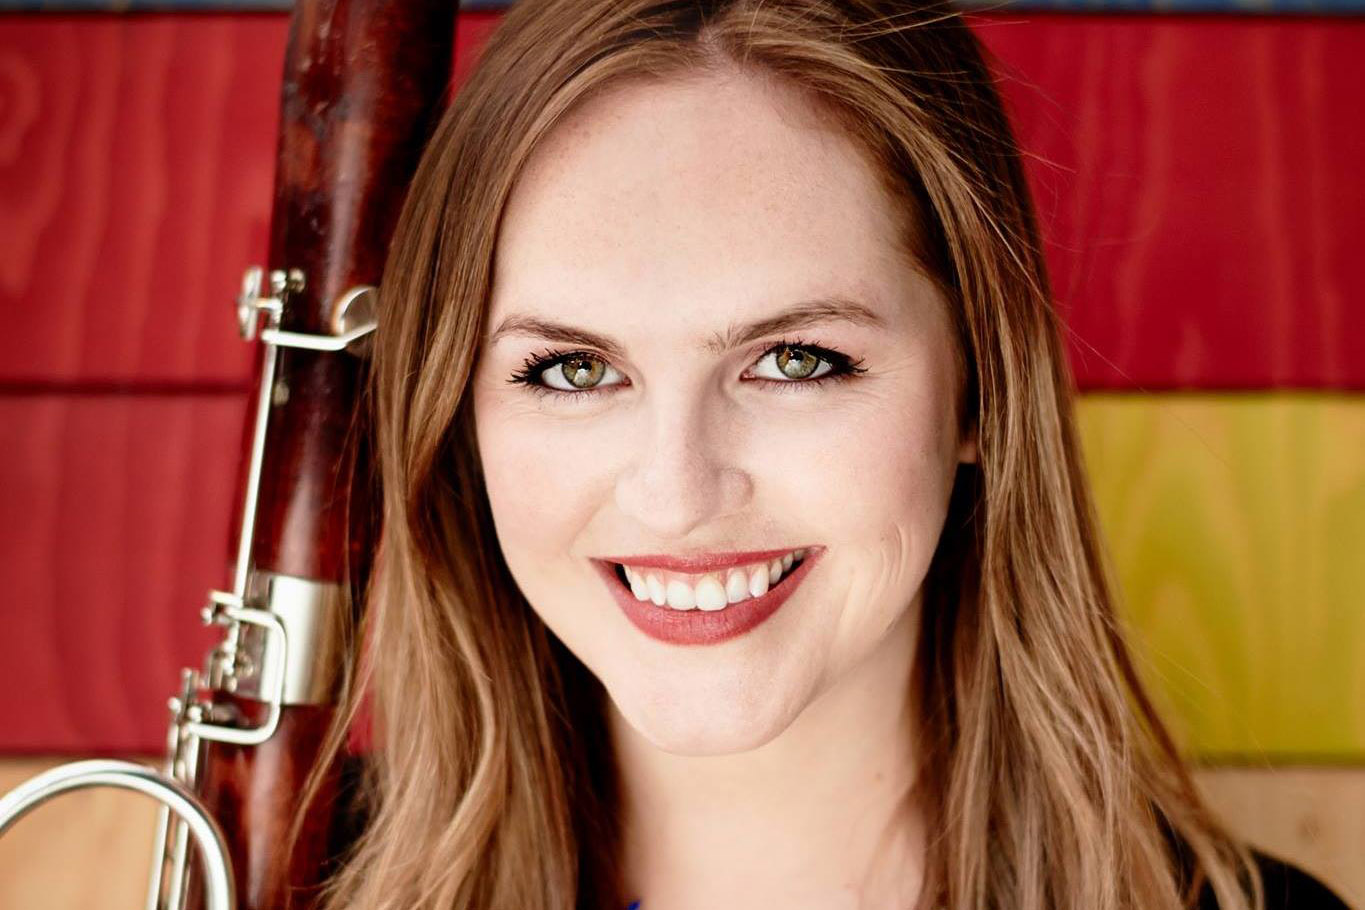 A close up image of a young woman smiling at the camera holding an oboe in front of a colourful background